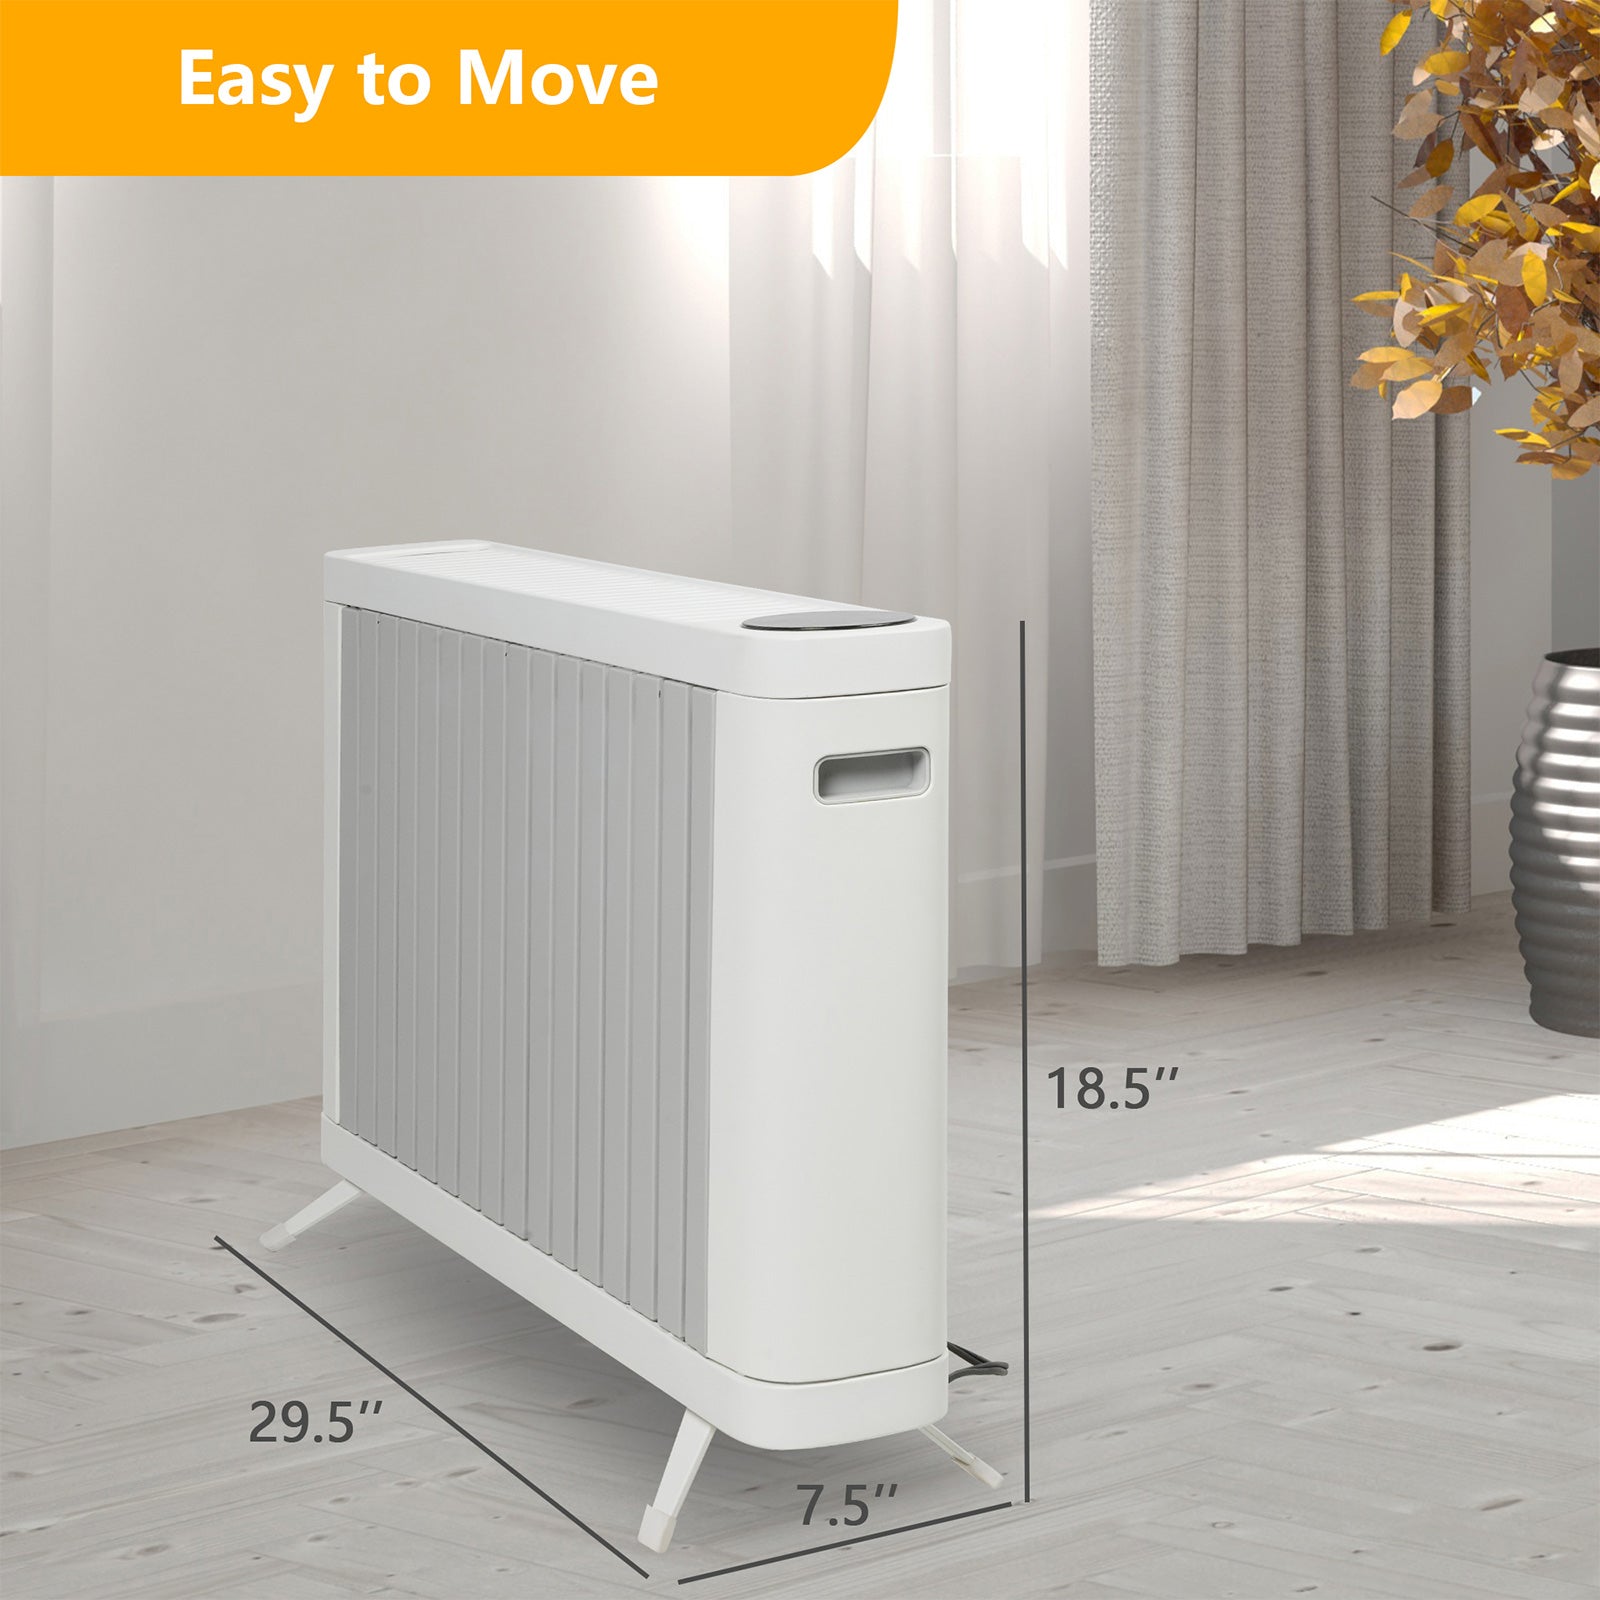 1500W Smart Radiator Space Heater with 3 Heating Modes Adjustable Thermostat